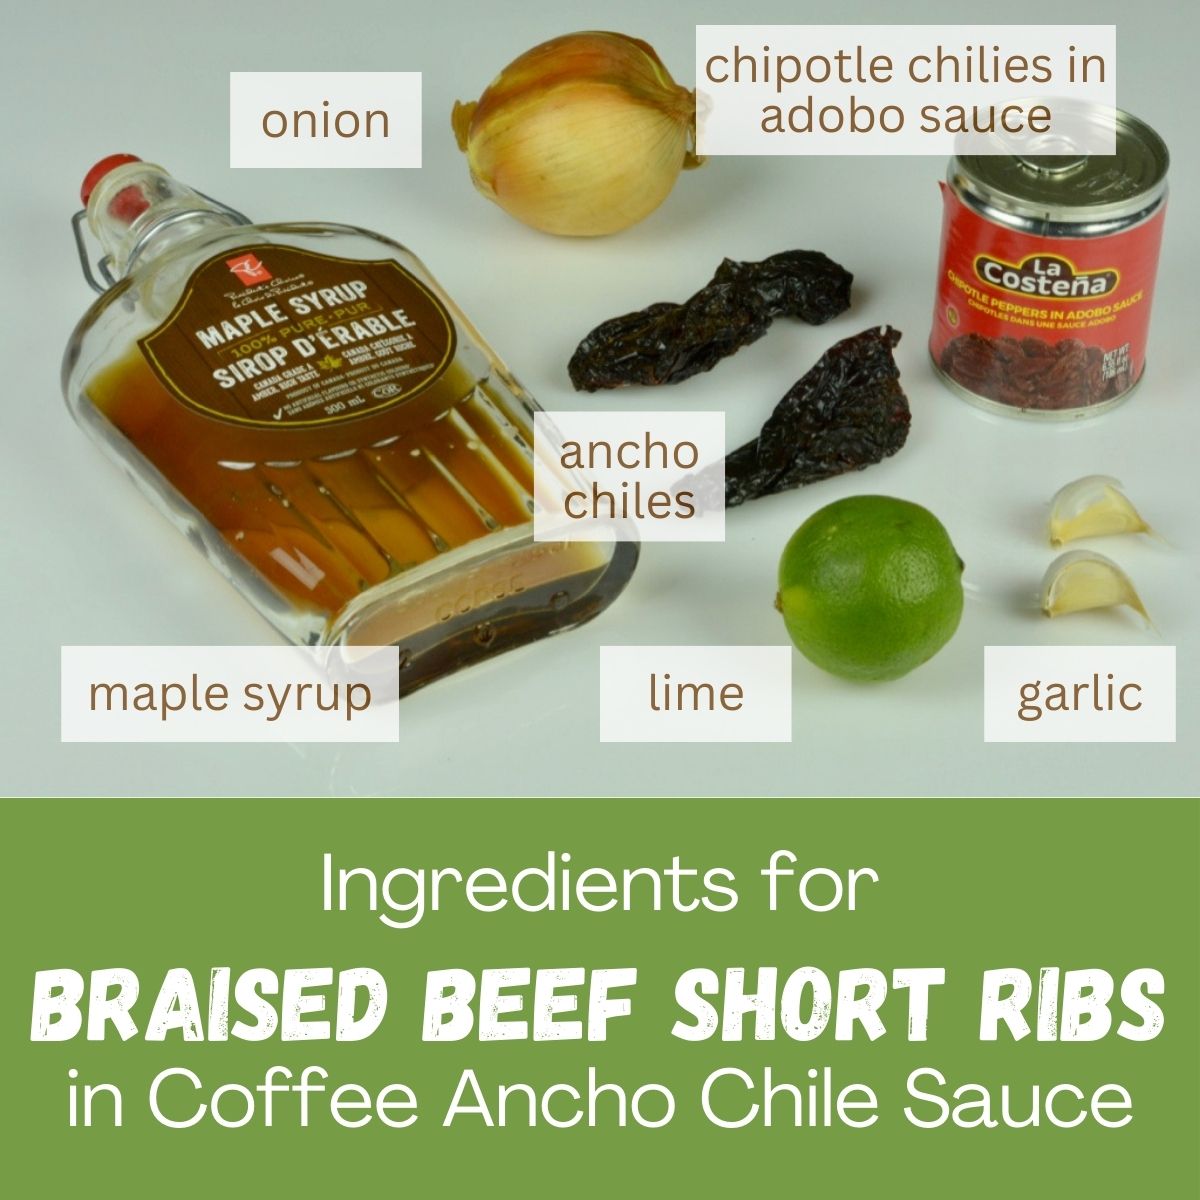 Six ingredients for Beef Short Ribs; maple syrup, ancho chiles, chipotle chiles in adobo sauce, onion, garlic and lime.